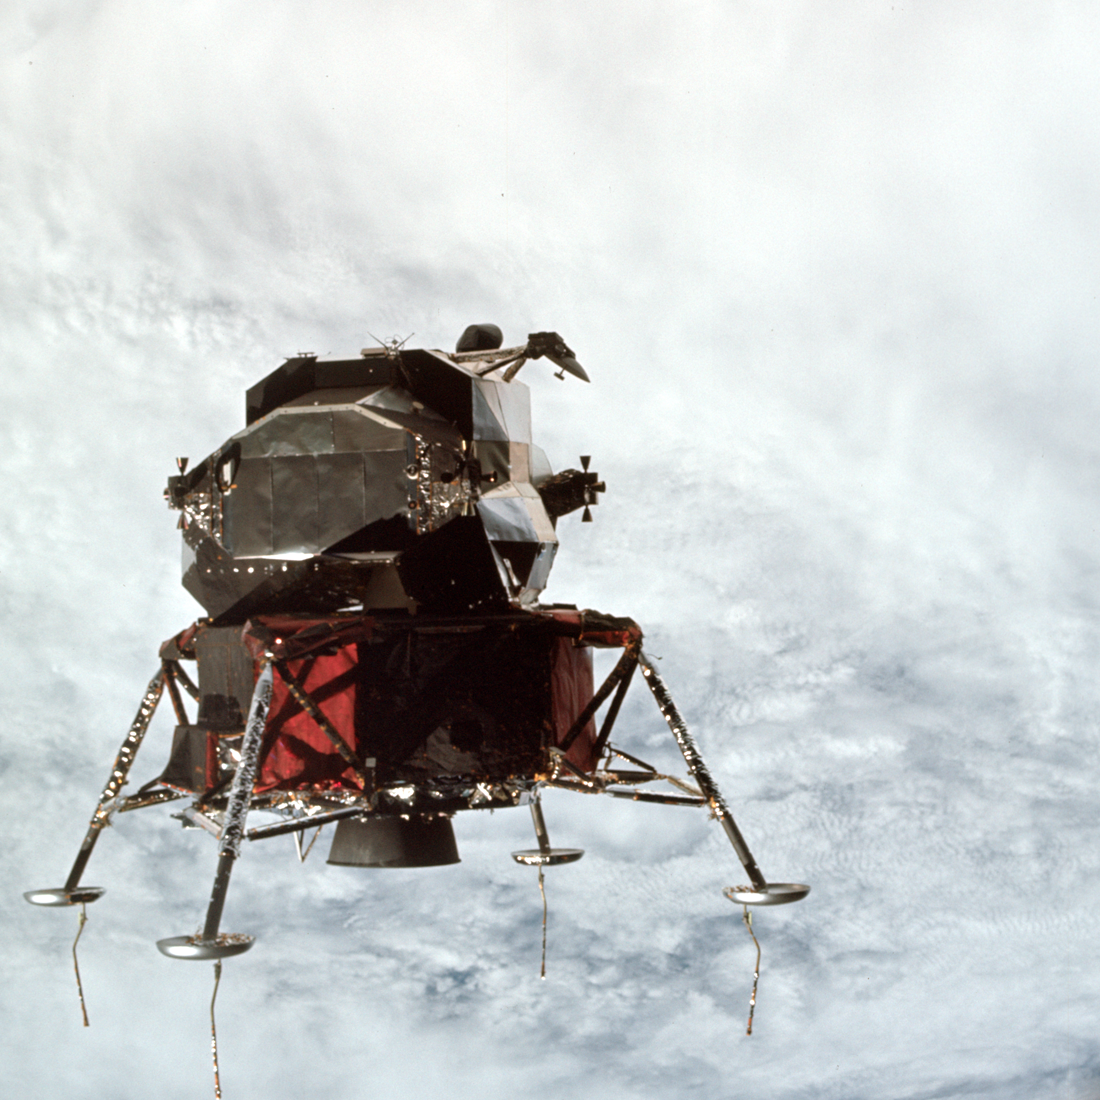 Above a cloudy Earth - another view of Lunar Module Spider.